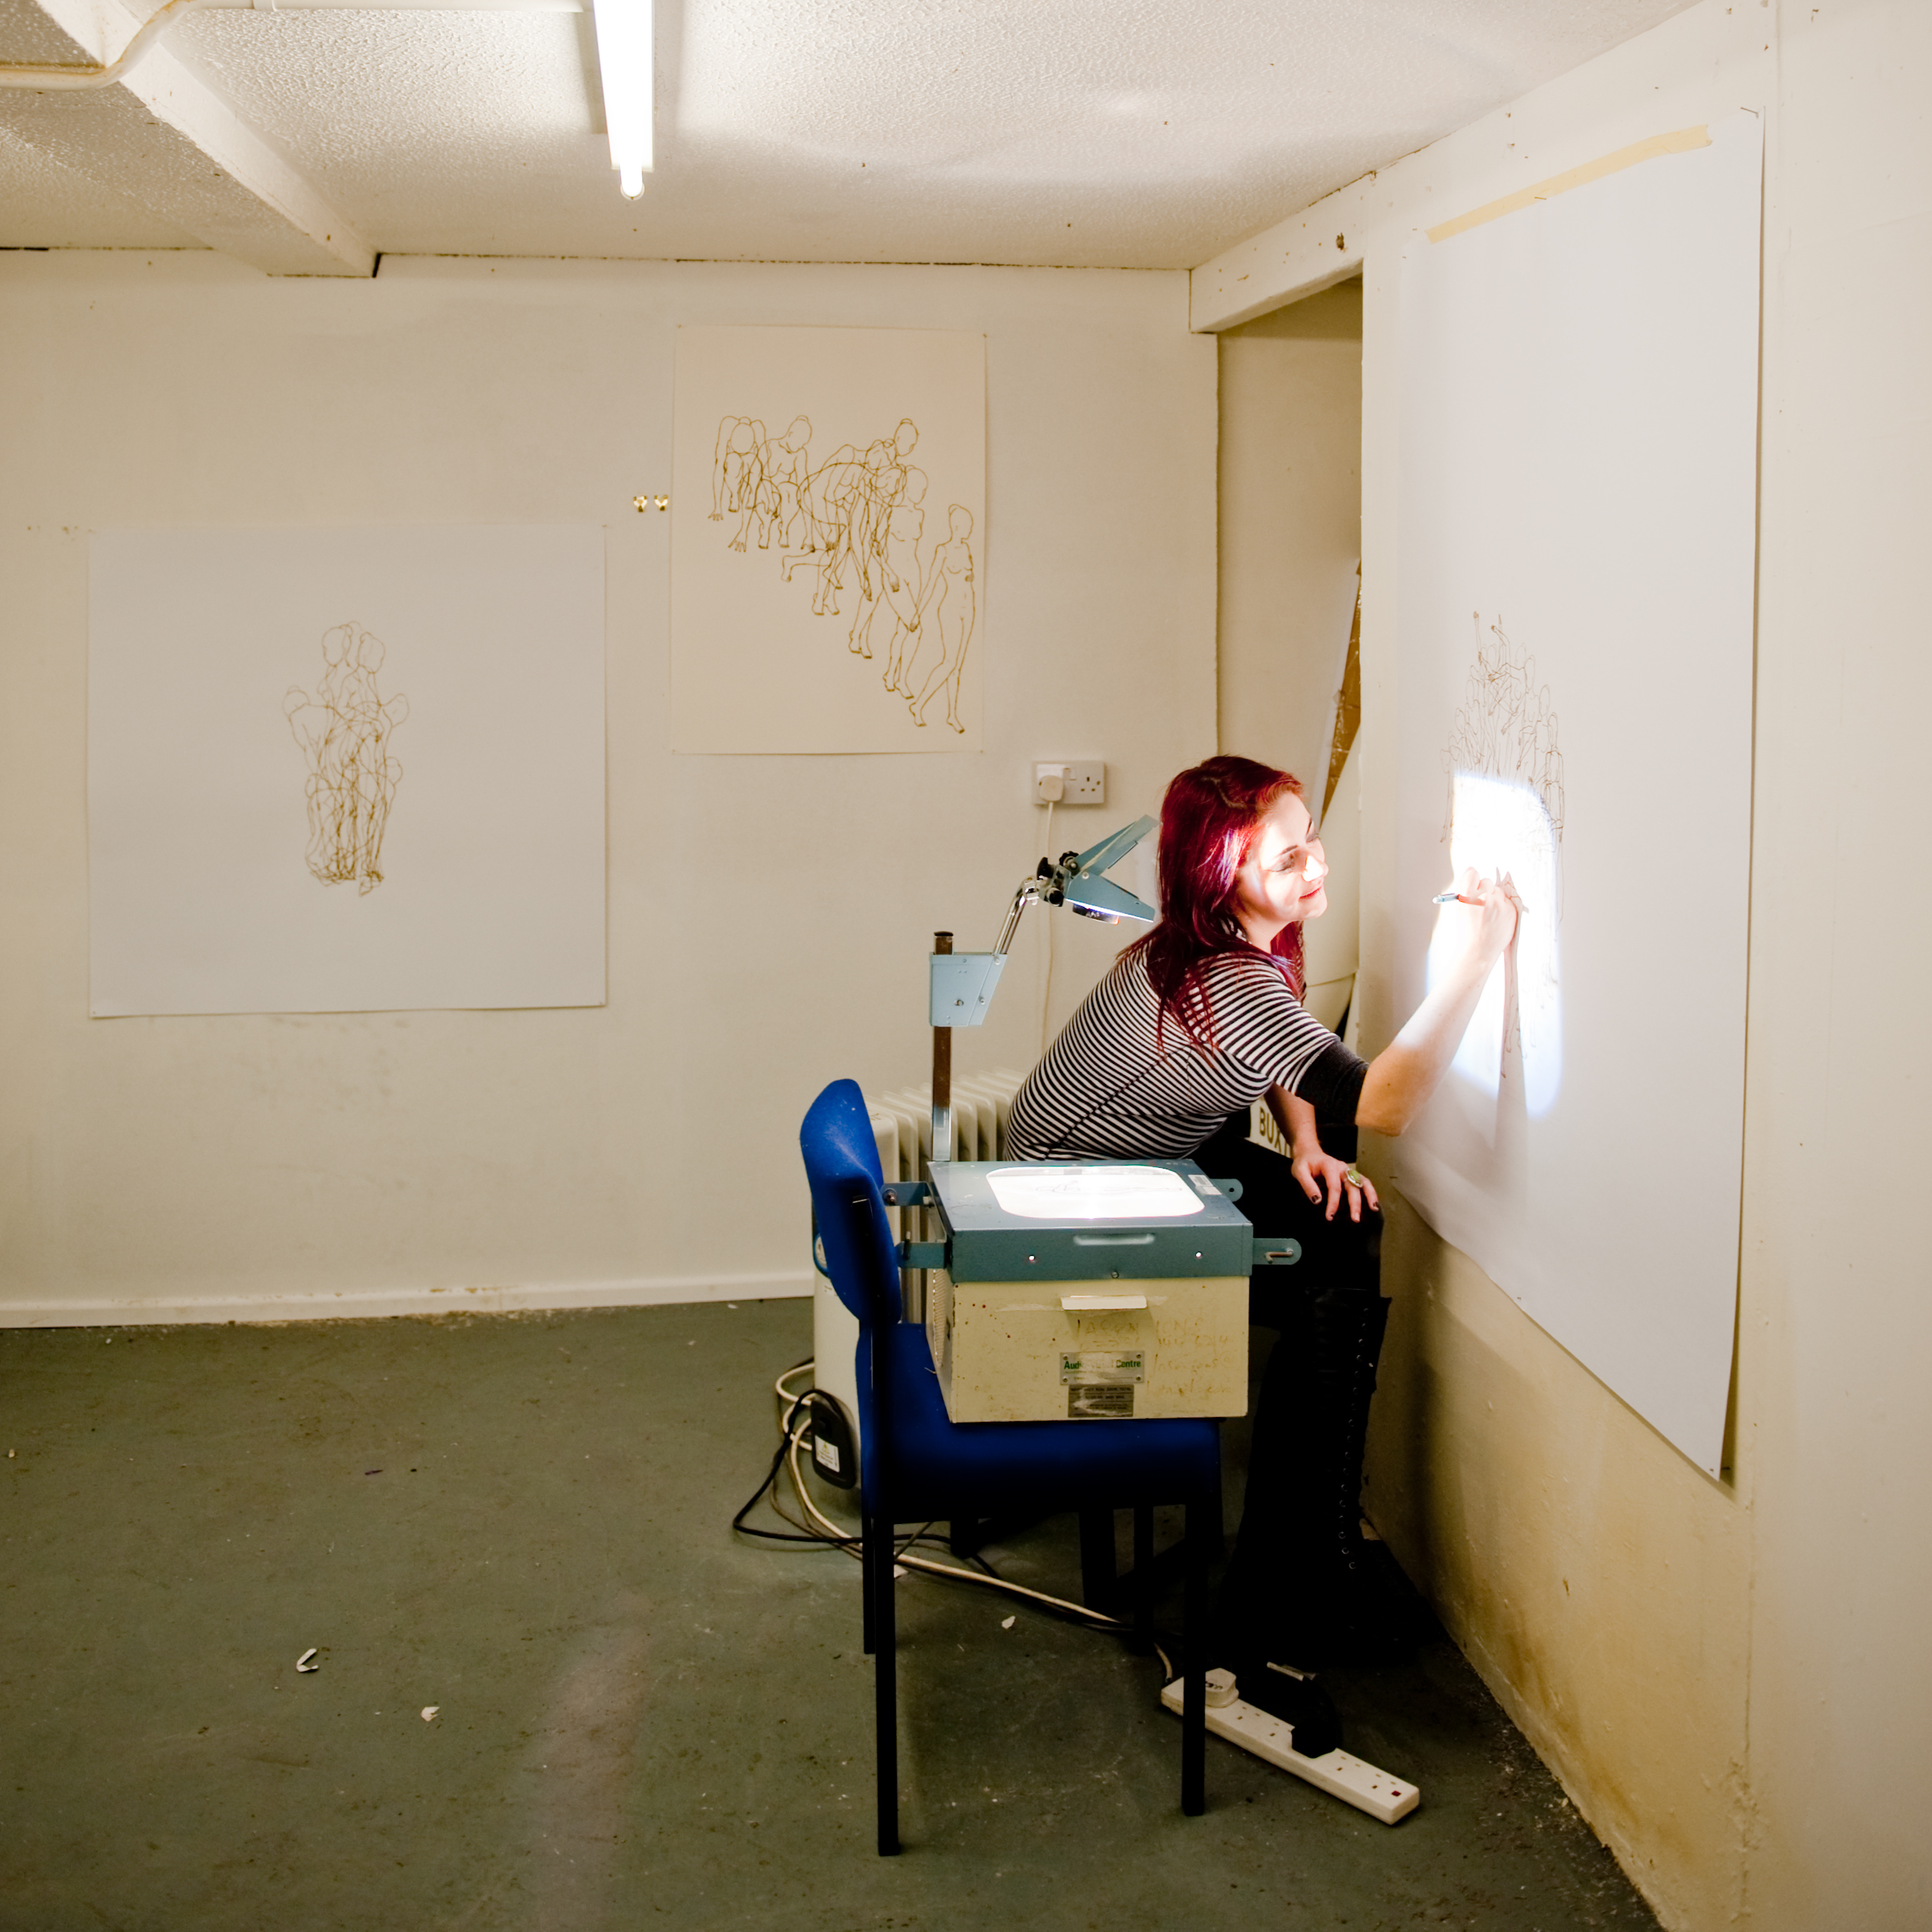 Photo of a woman sitting next to a projector, drawing onto paper attached to the wall